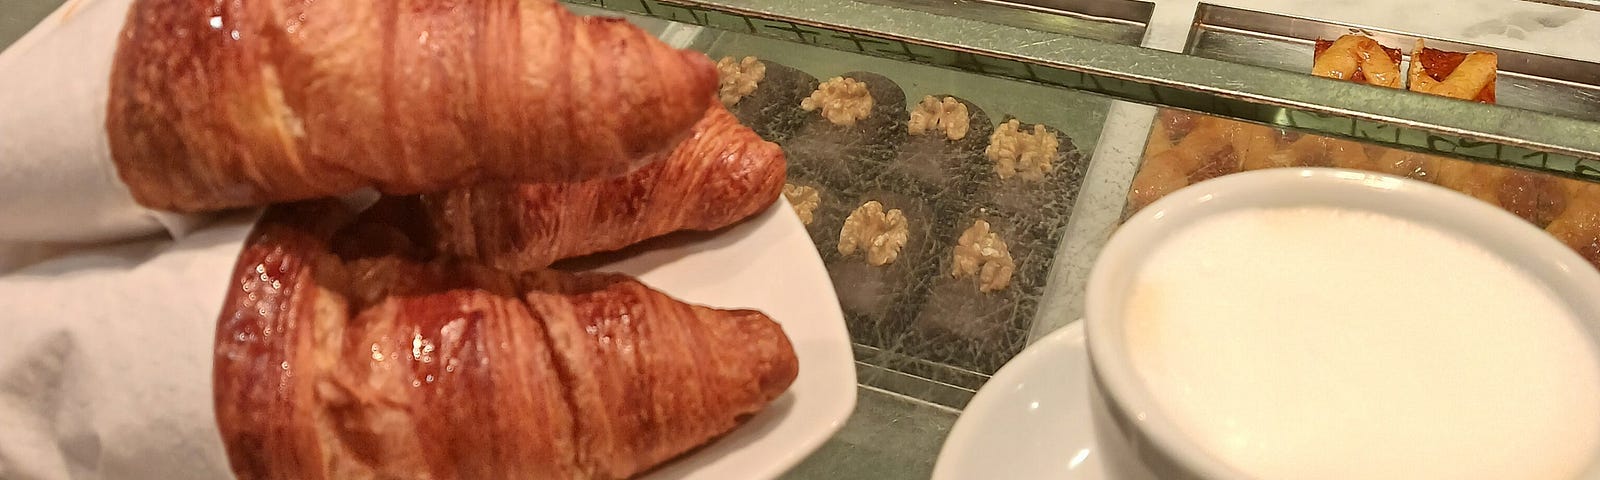 Cappuccino and croissants at a pastry store in Venice